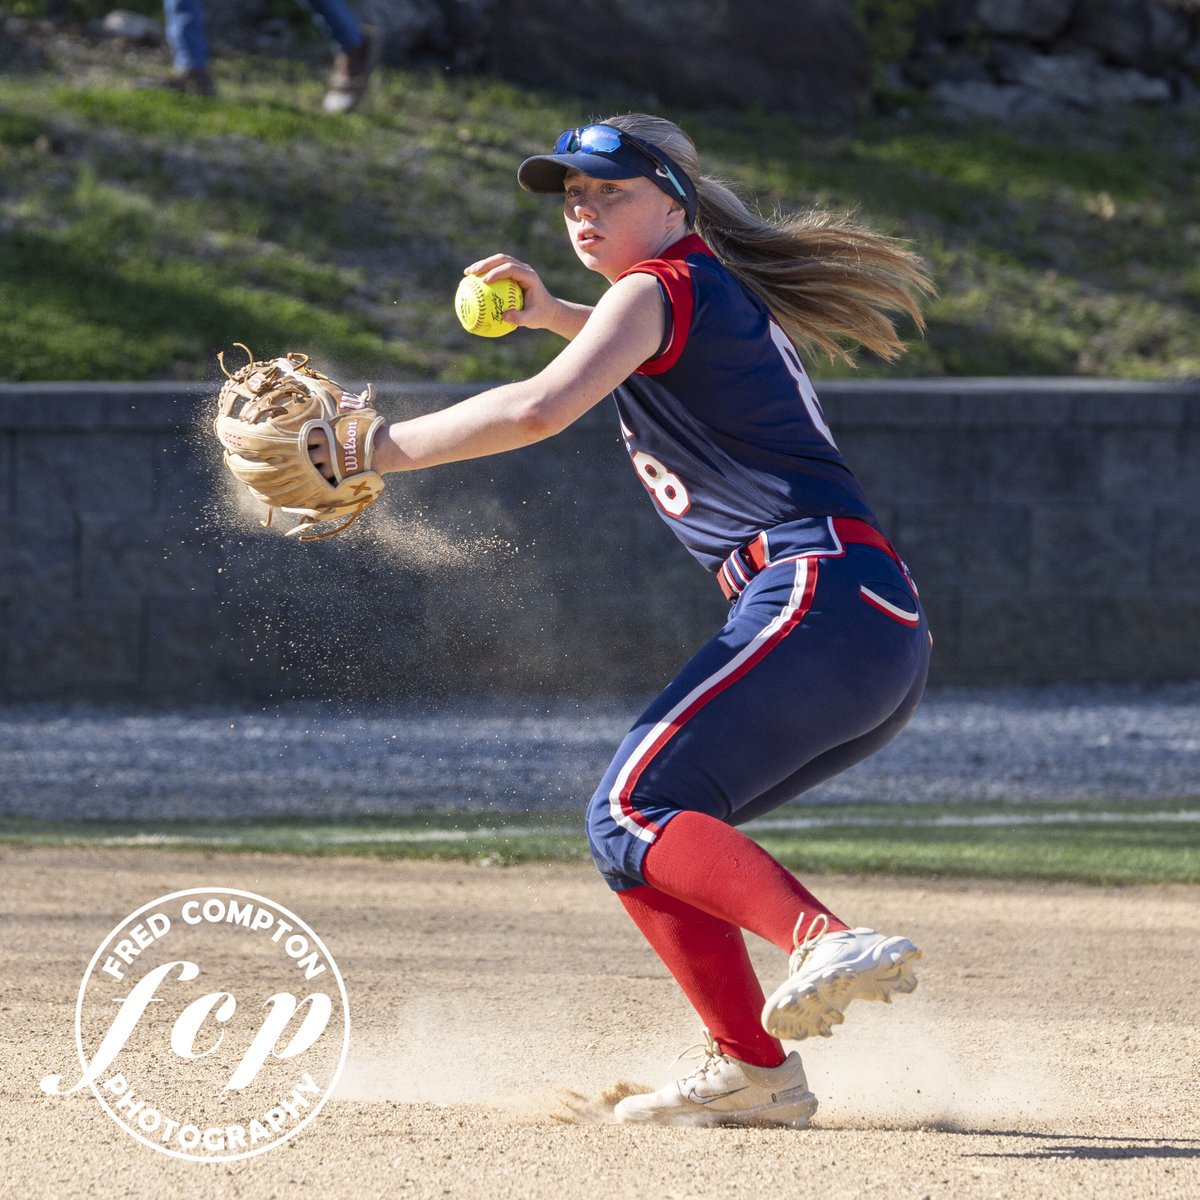 If you need pictures for a special event, to capture your athlete during game play, or just about anything else, I hope you'll  consider reaching out to me. fredcompton.com
#girlssoftball #playsoftball #girls #softball #professionalphotographer #photos #photography #photo